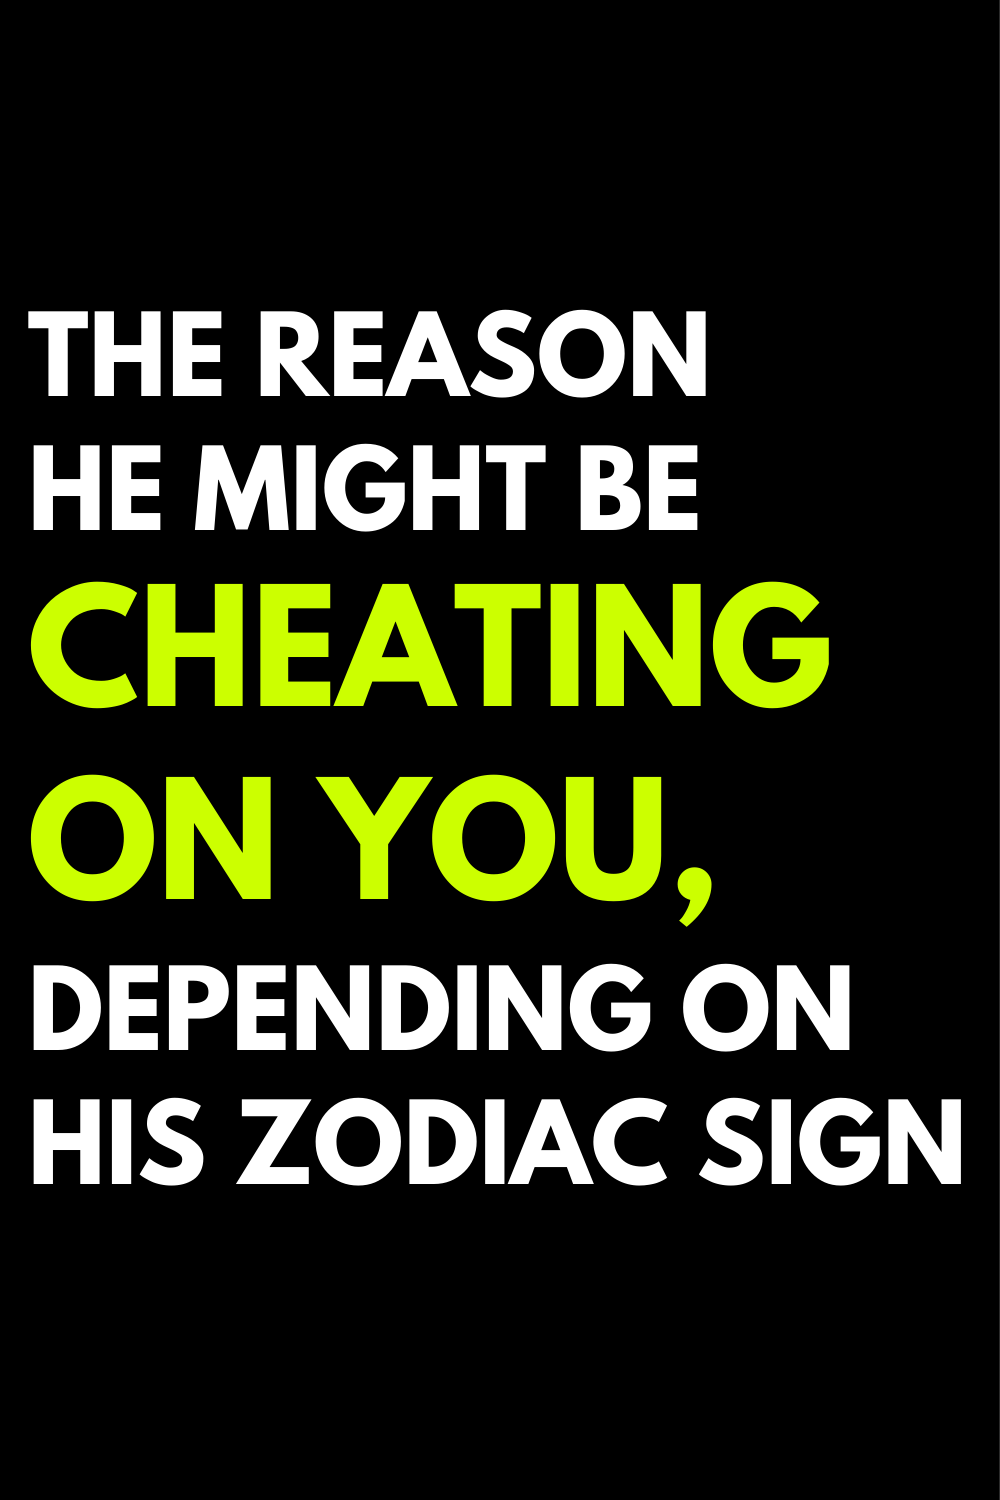 The reason he might be cheating on you, depending on his zodiac sign